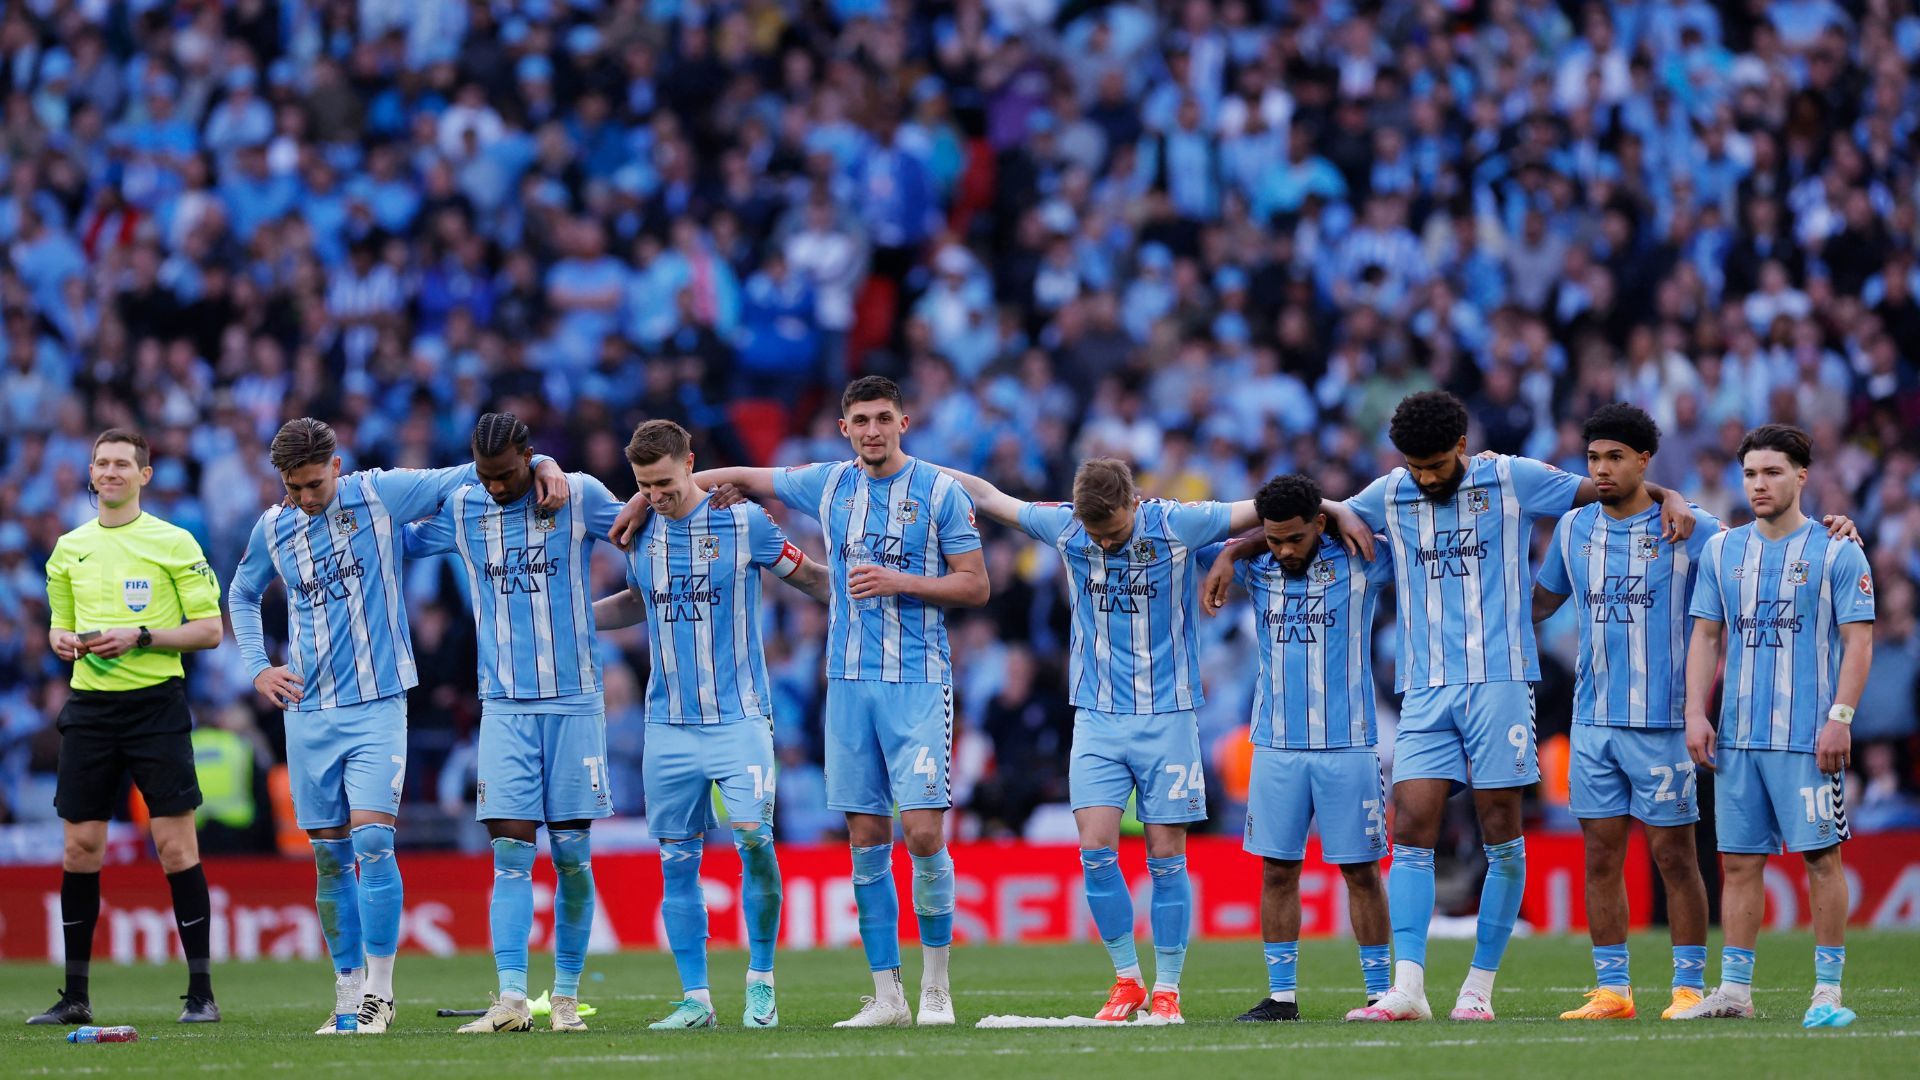 Coventry City's players in the FA Cup Semi-Final penalty shootout vs Manchester United